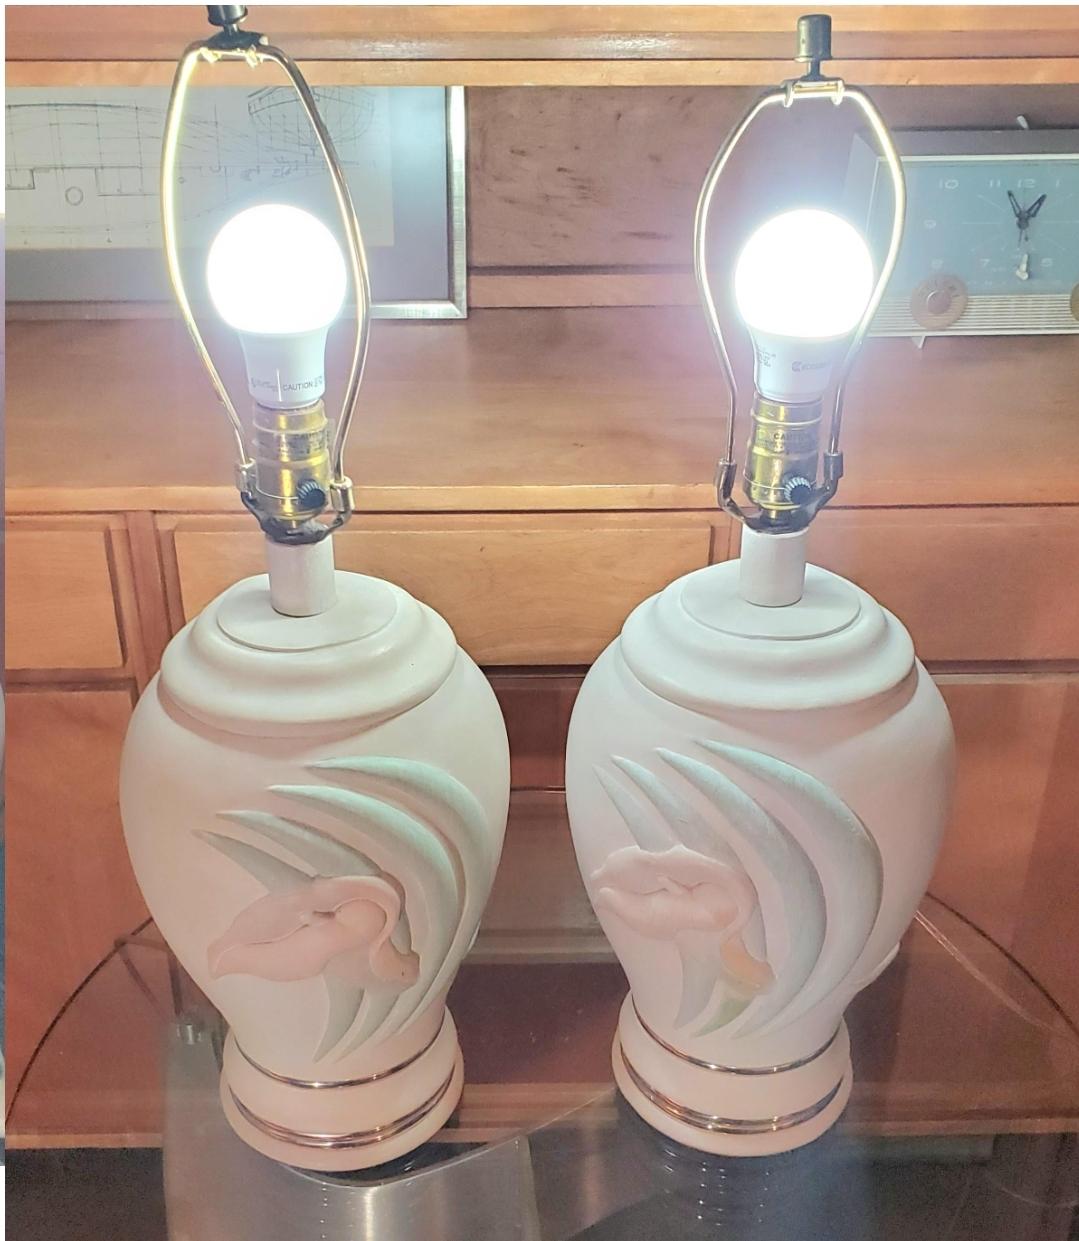 Unknown 1980s Postmodern Collective Elegance Pastel Ceramic Lamps, a Pair